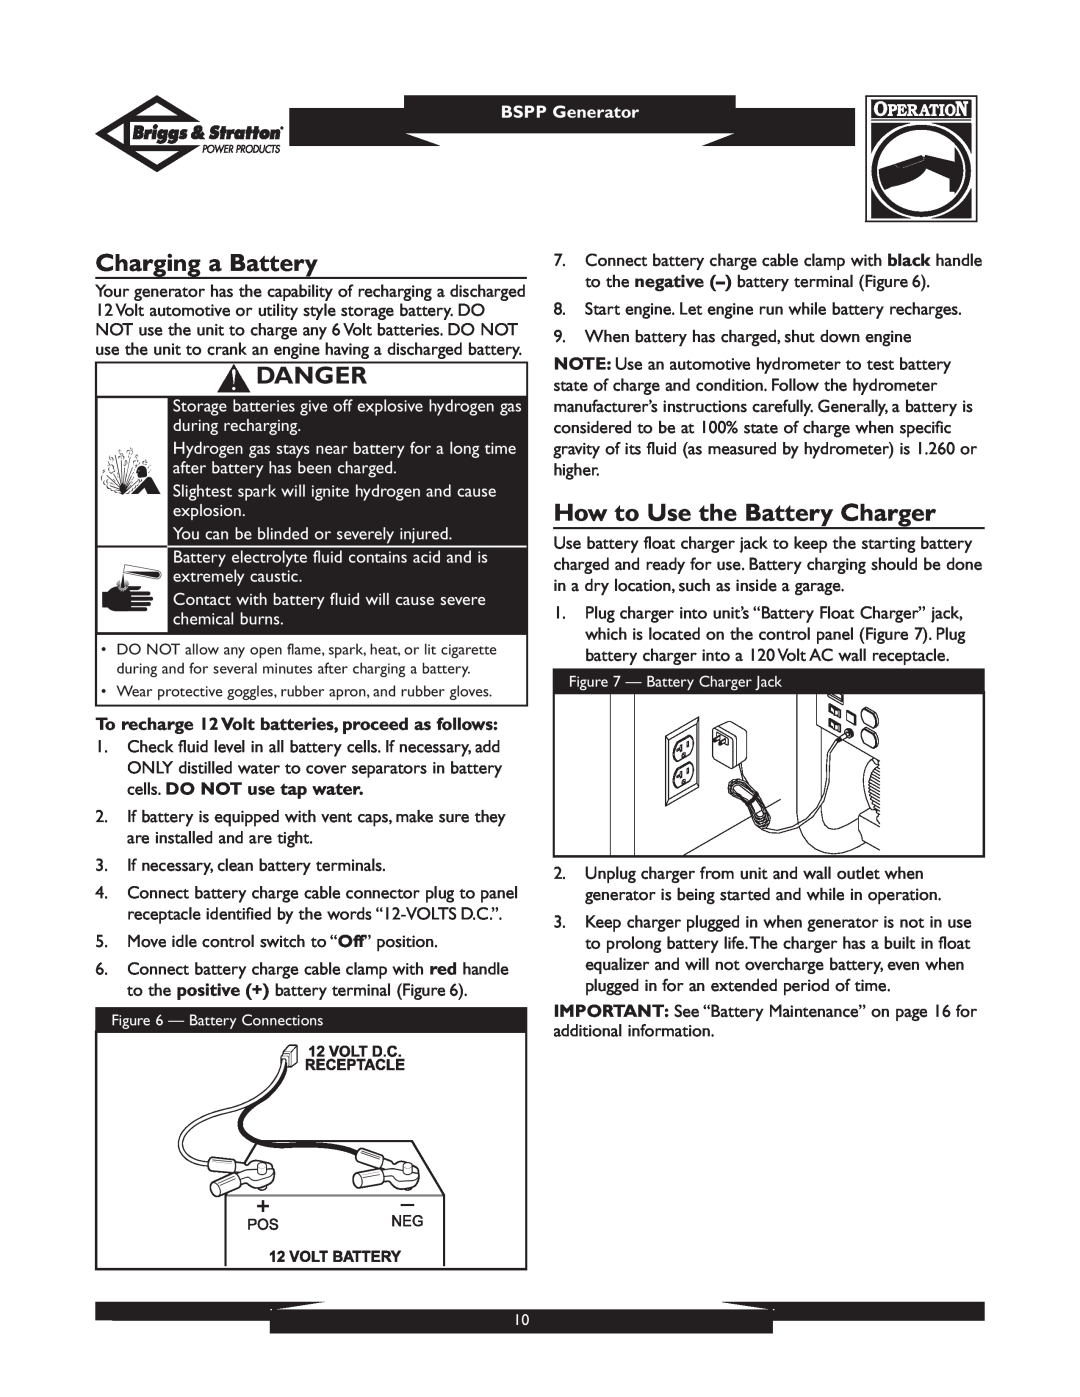 Briggs & Stratton PRO8000 owner manual Charging a Battery, How to Use the Battery Charger, Danger, BSPP Generator 